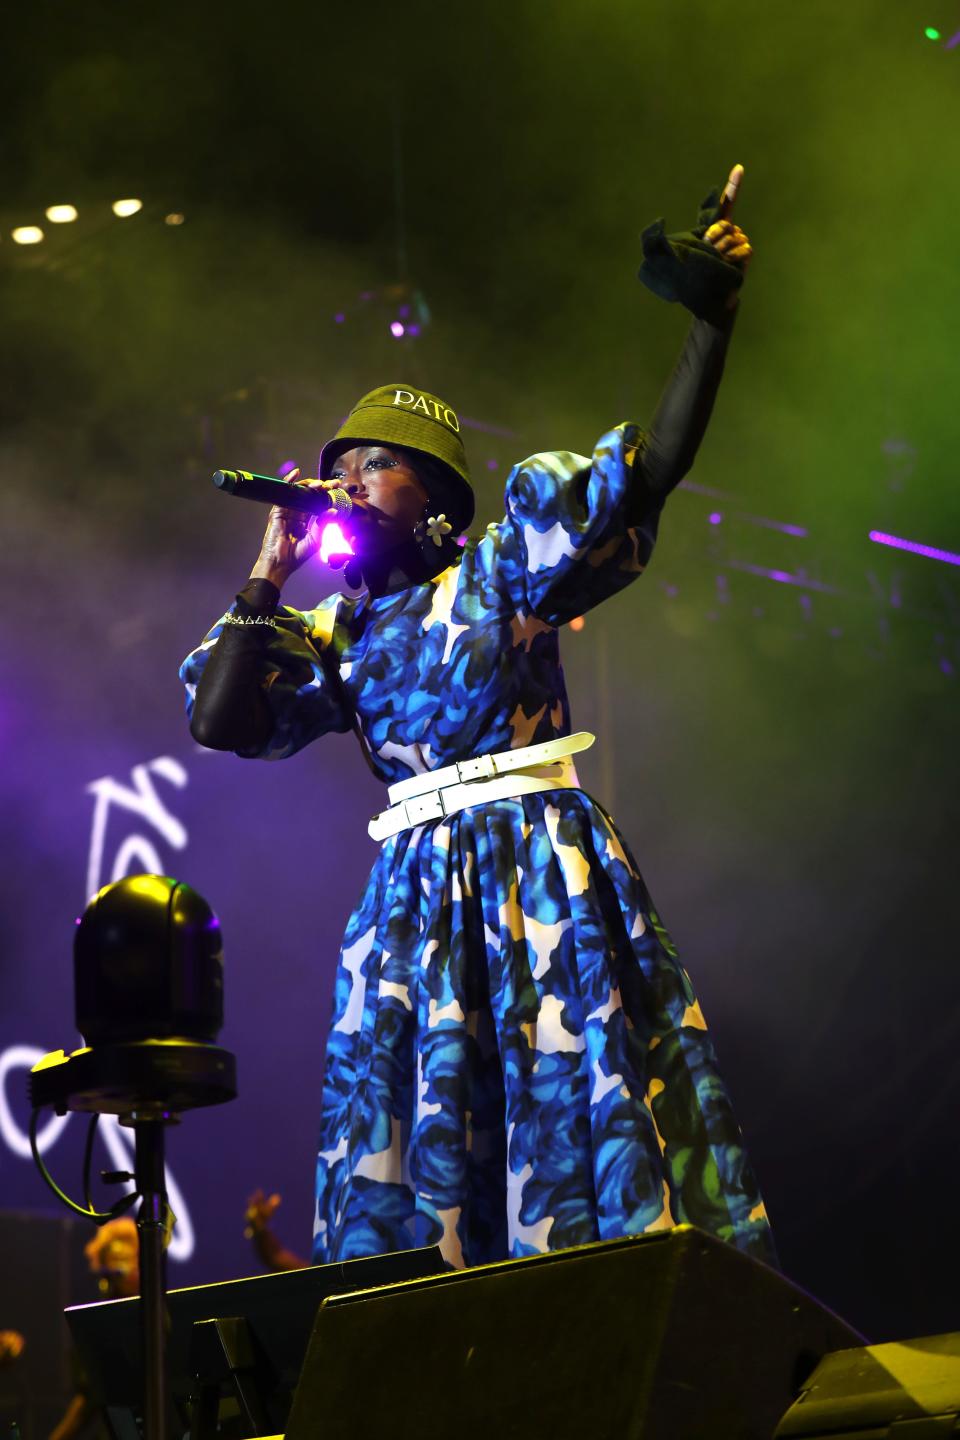 NEW ORLEANS, LOUISIANA - JULY 01: Lauryn Hill performs onstage during the 2022 Essence Festival of Culture at the Louisiana Superdome on July 1, 2022 in New Orleans, Louisiana. (Photo by Bennett Raglin/Getty Images for Essence) ORG XMIT: 775832010 ORIG FILE ID: 1406299620